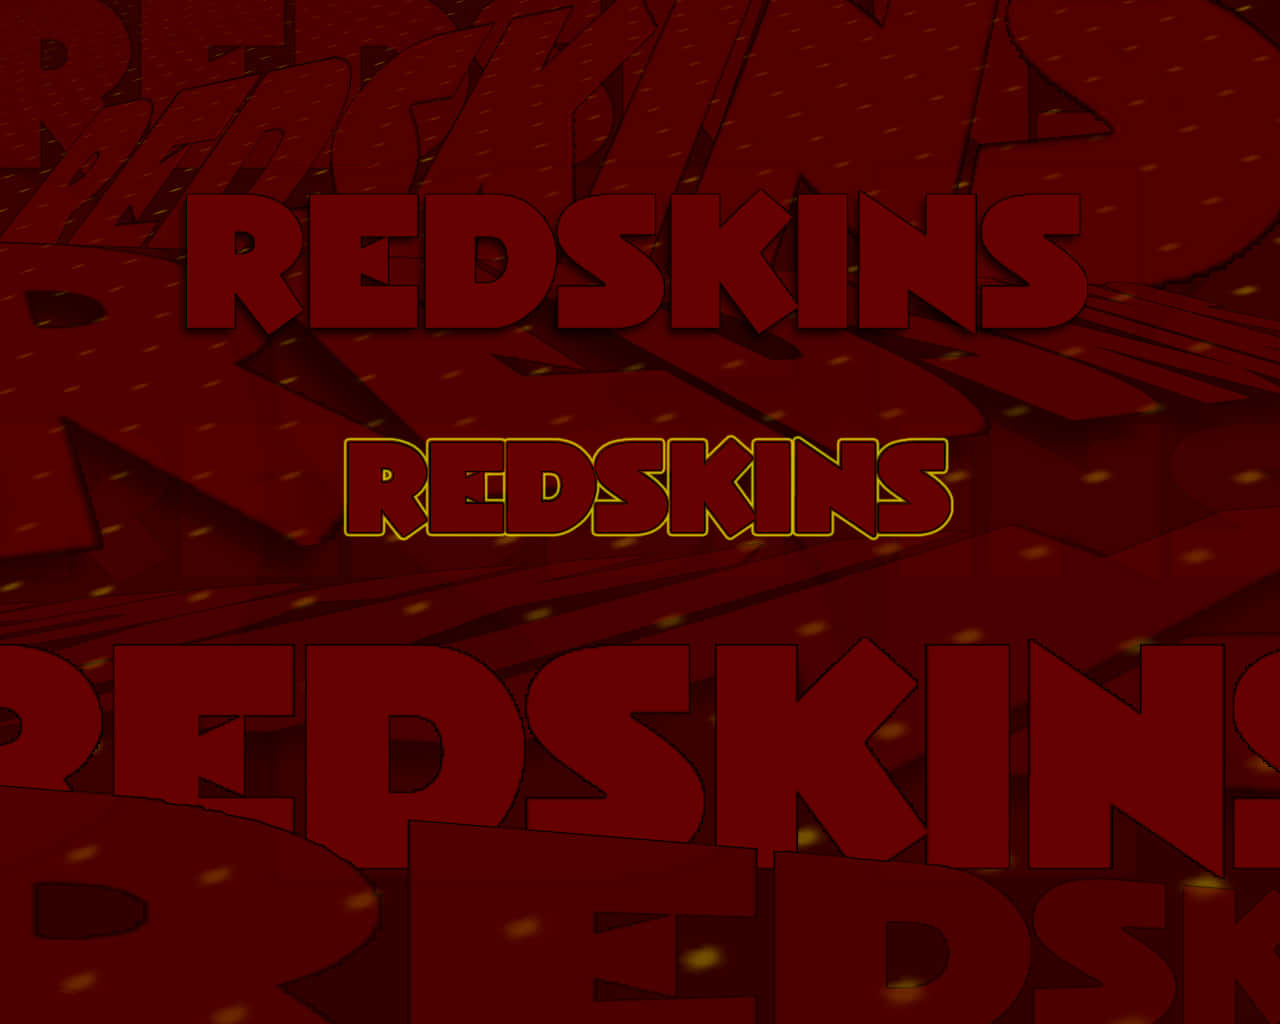 Exciting action from a Washington Redskins match. Wallpaper